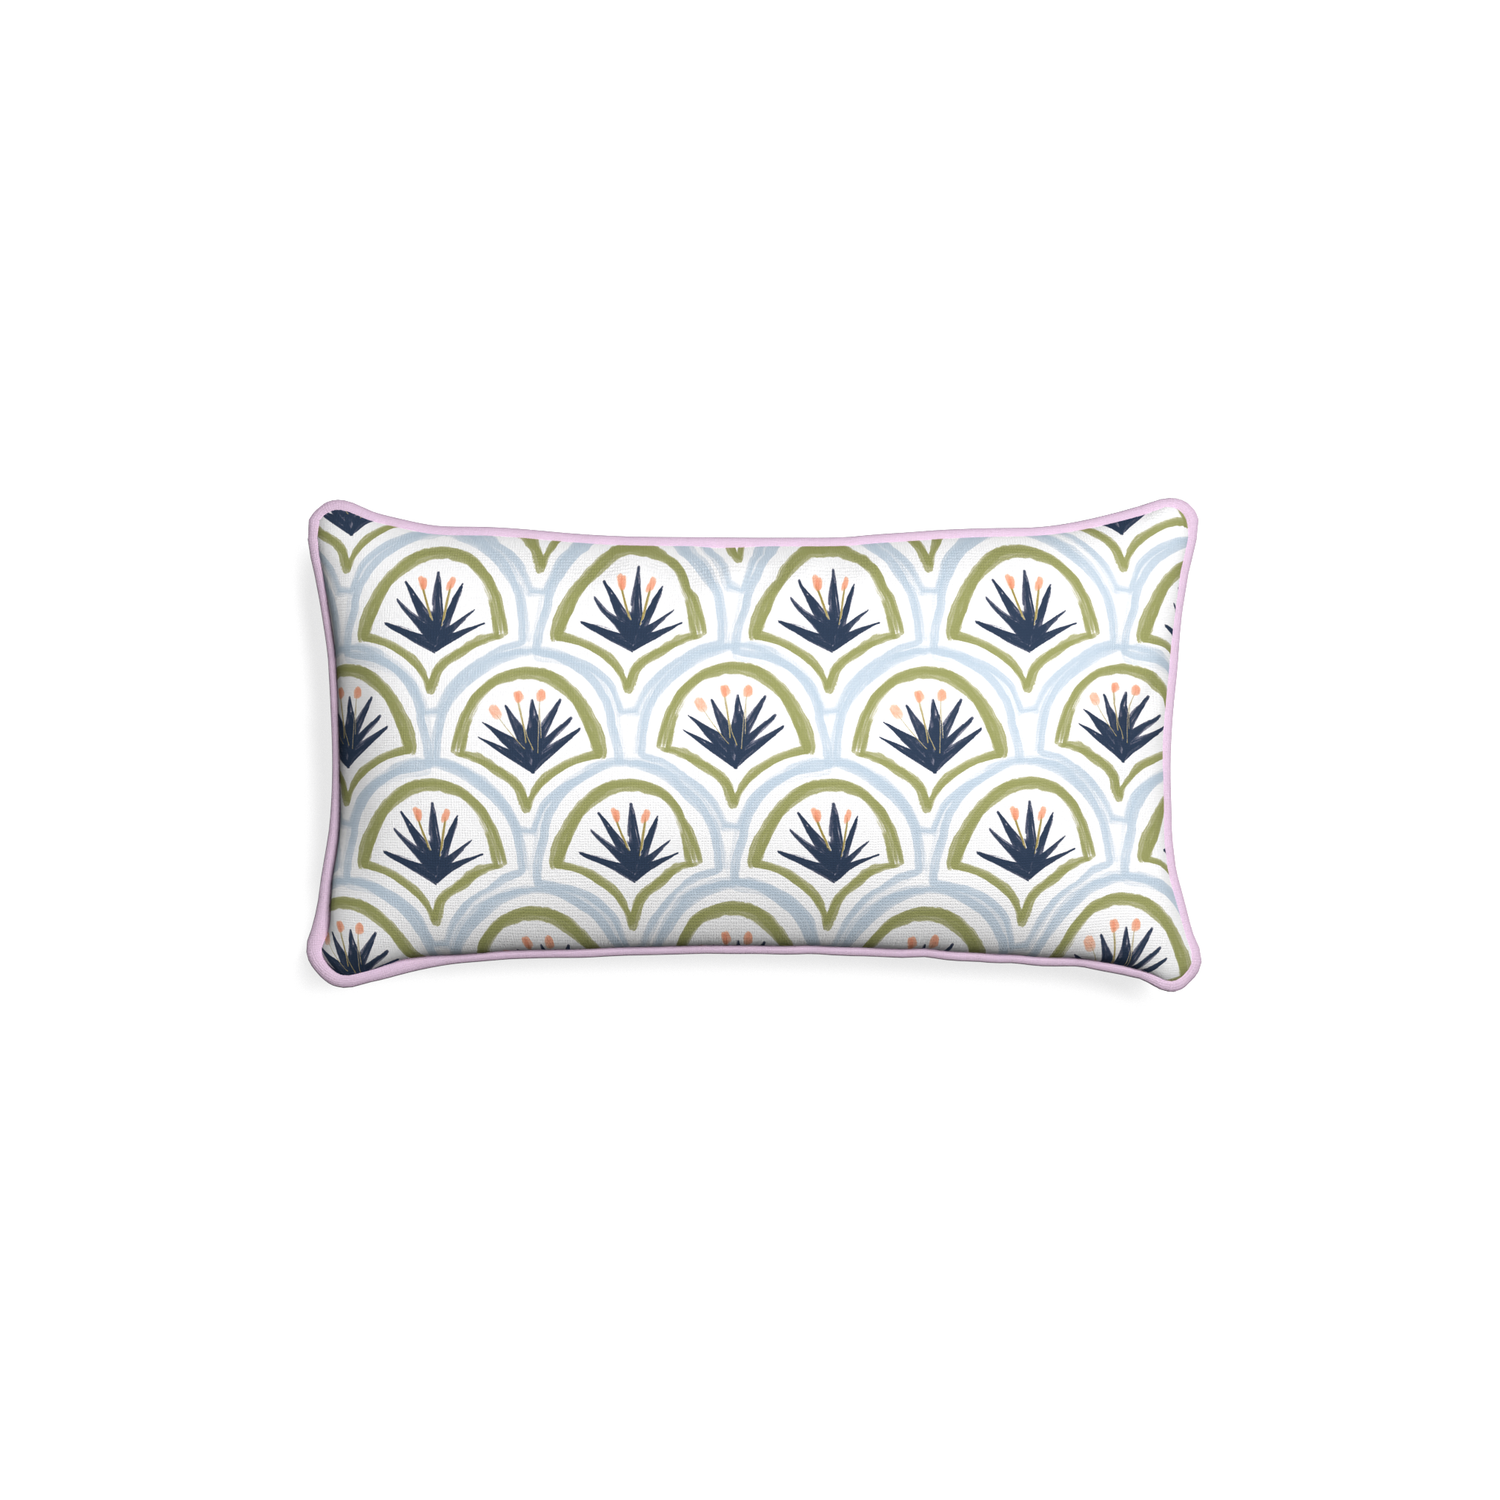 Petite-lumbar thatcher midnight custom art deco palm patternpillow with l piping on white background